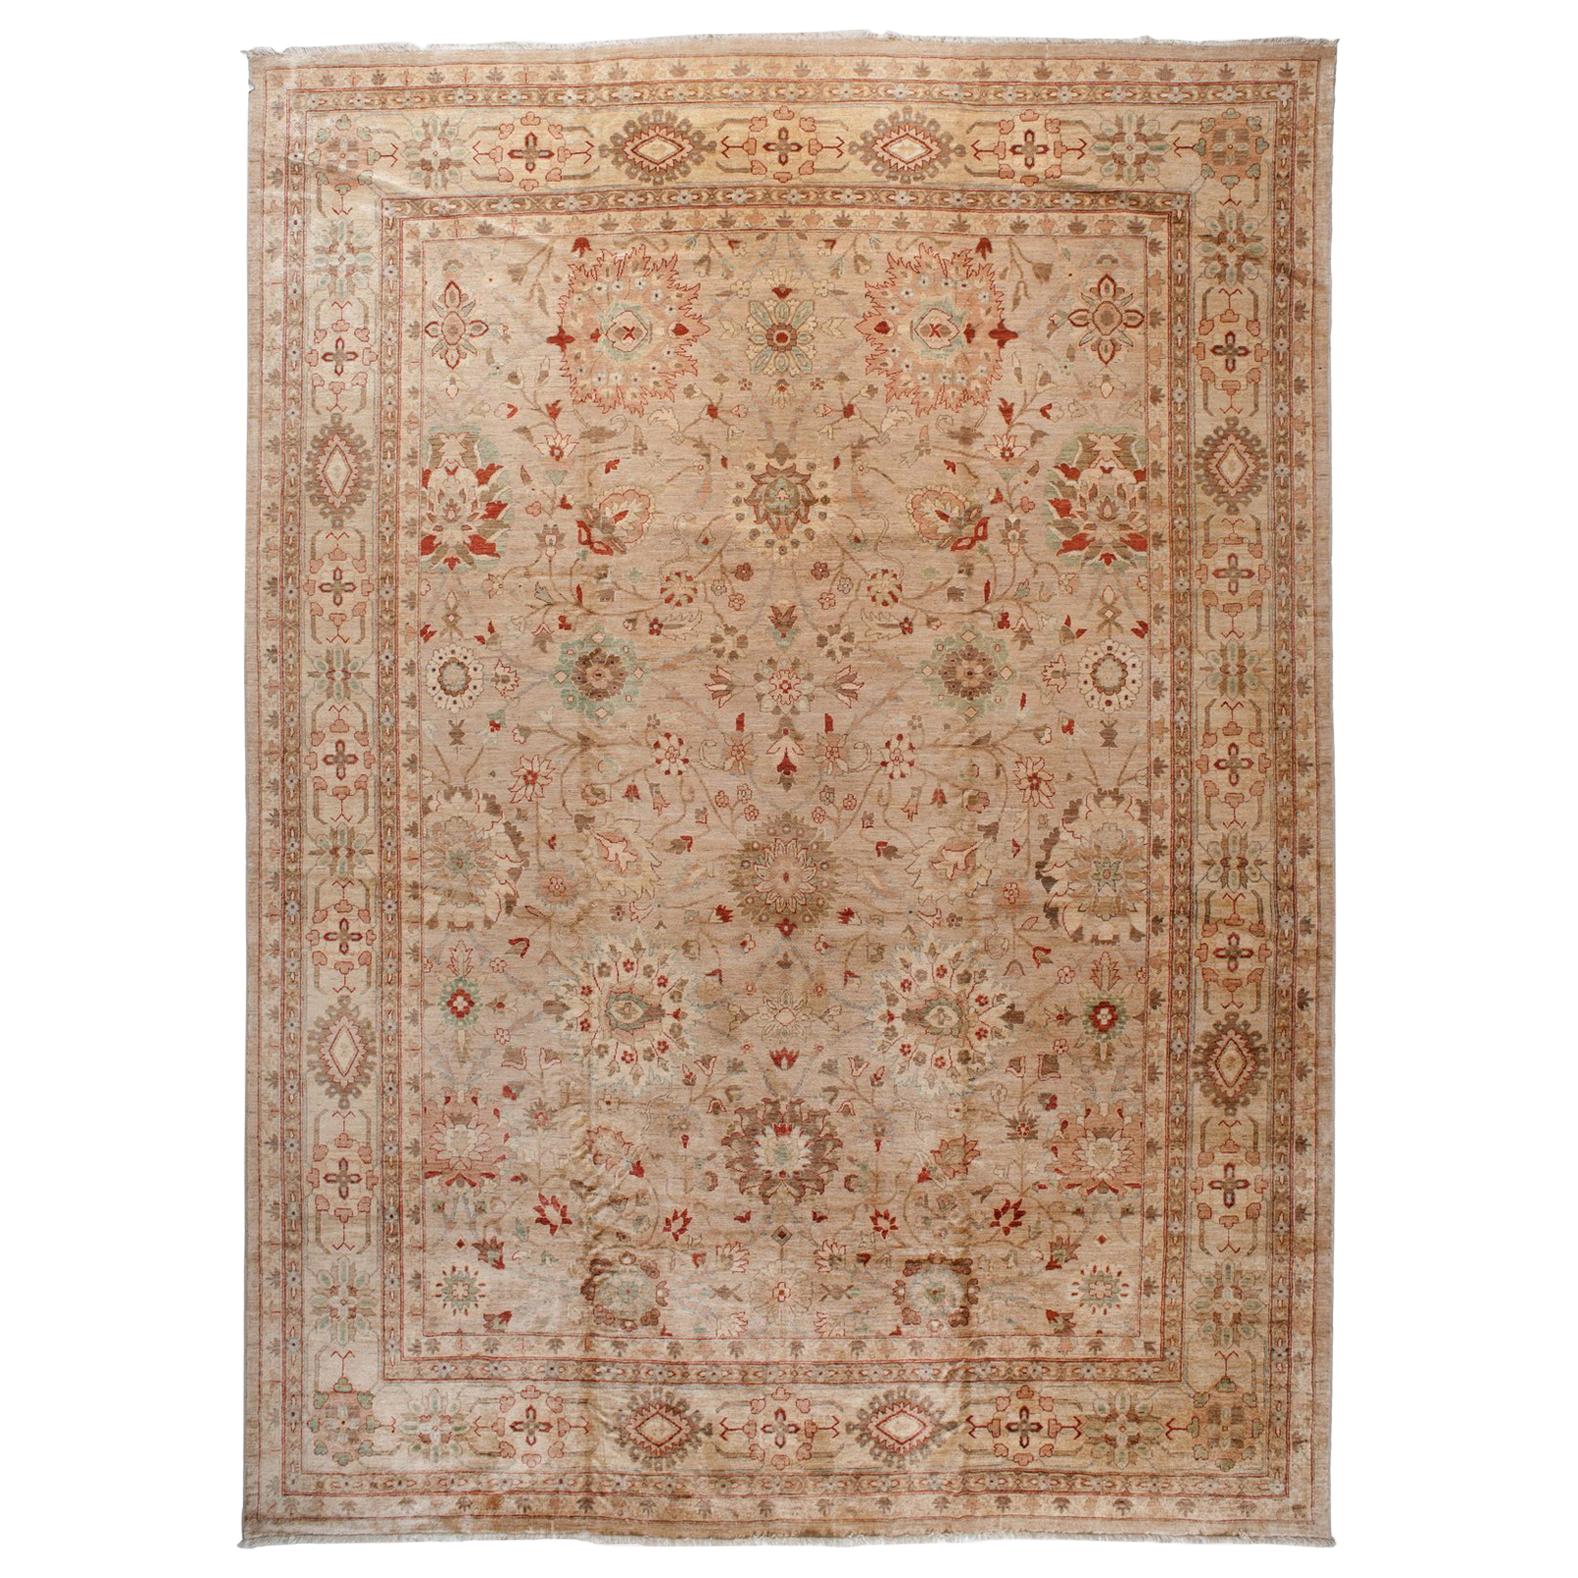 Wool Area Rug with Traditional Pakistani Floral Design